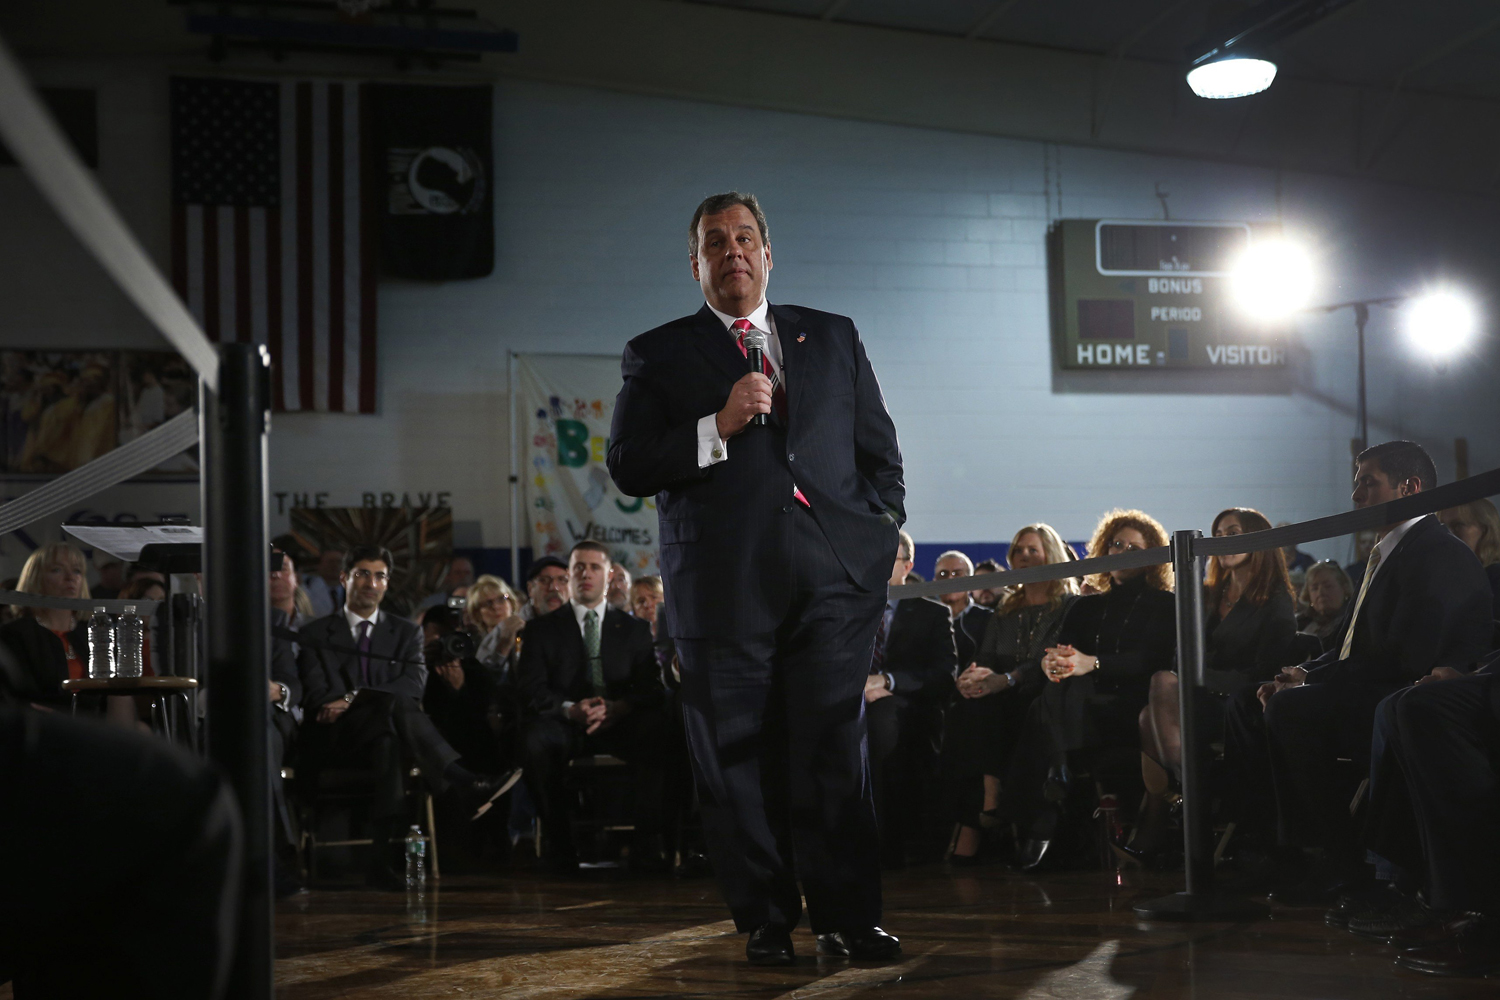 New Jersey Governor Christie speaks to local residents of Belmar, New Jersey and other shore towns in Monmouth County during a Town Hall meeting to discuss federal funds for recovery from hurricane Sandy, in Belmar